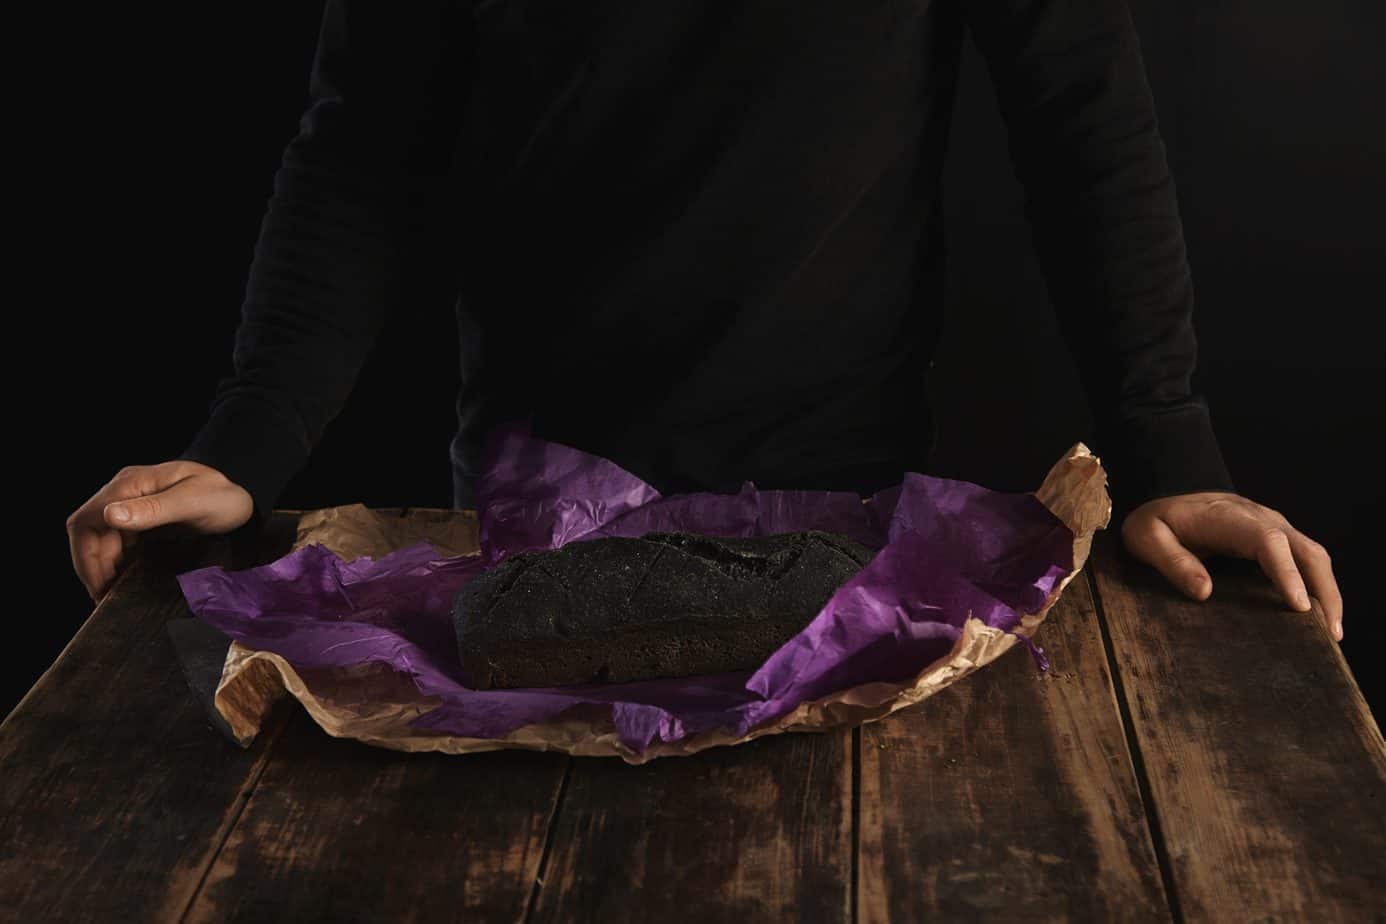 Purple bread – a superfood you can make at home!